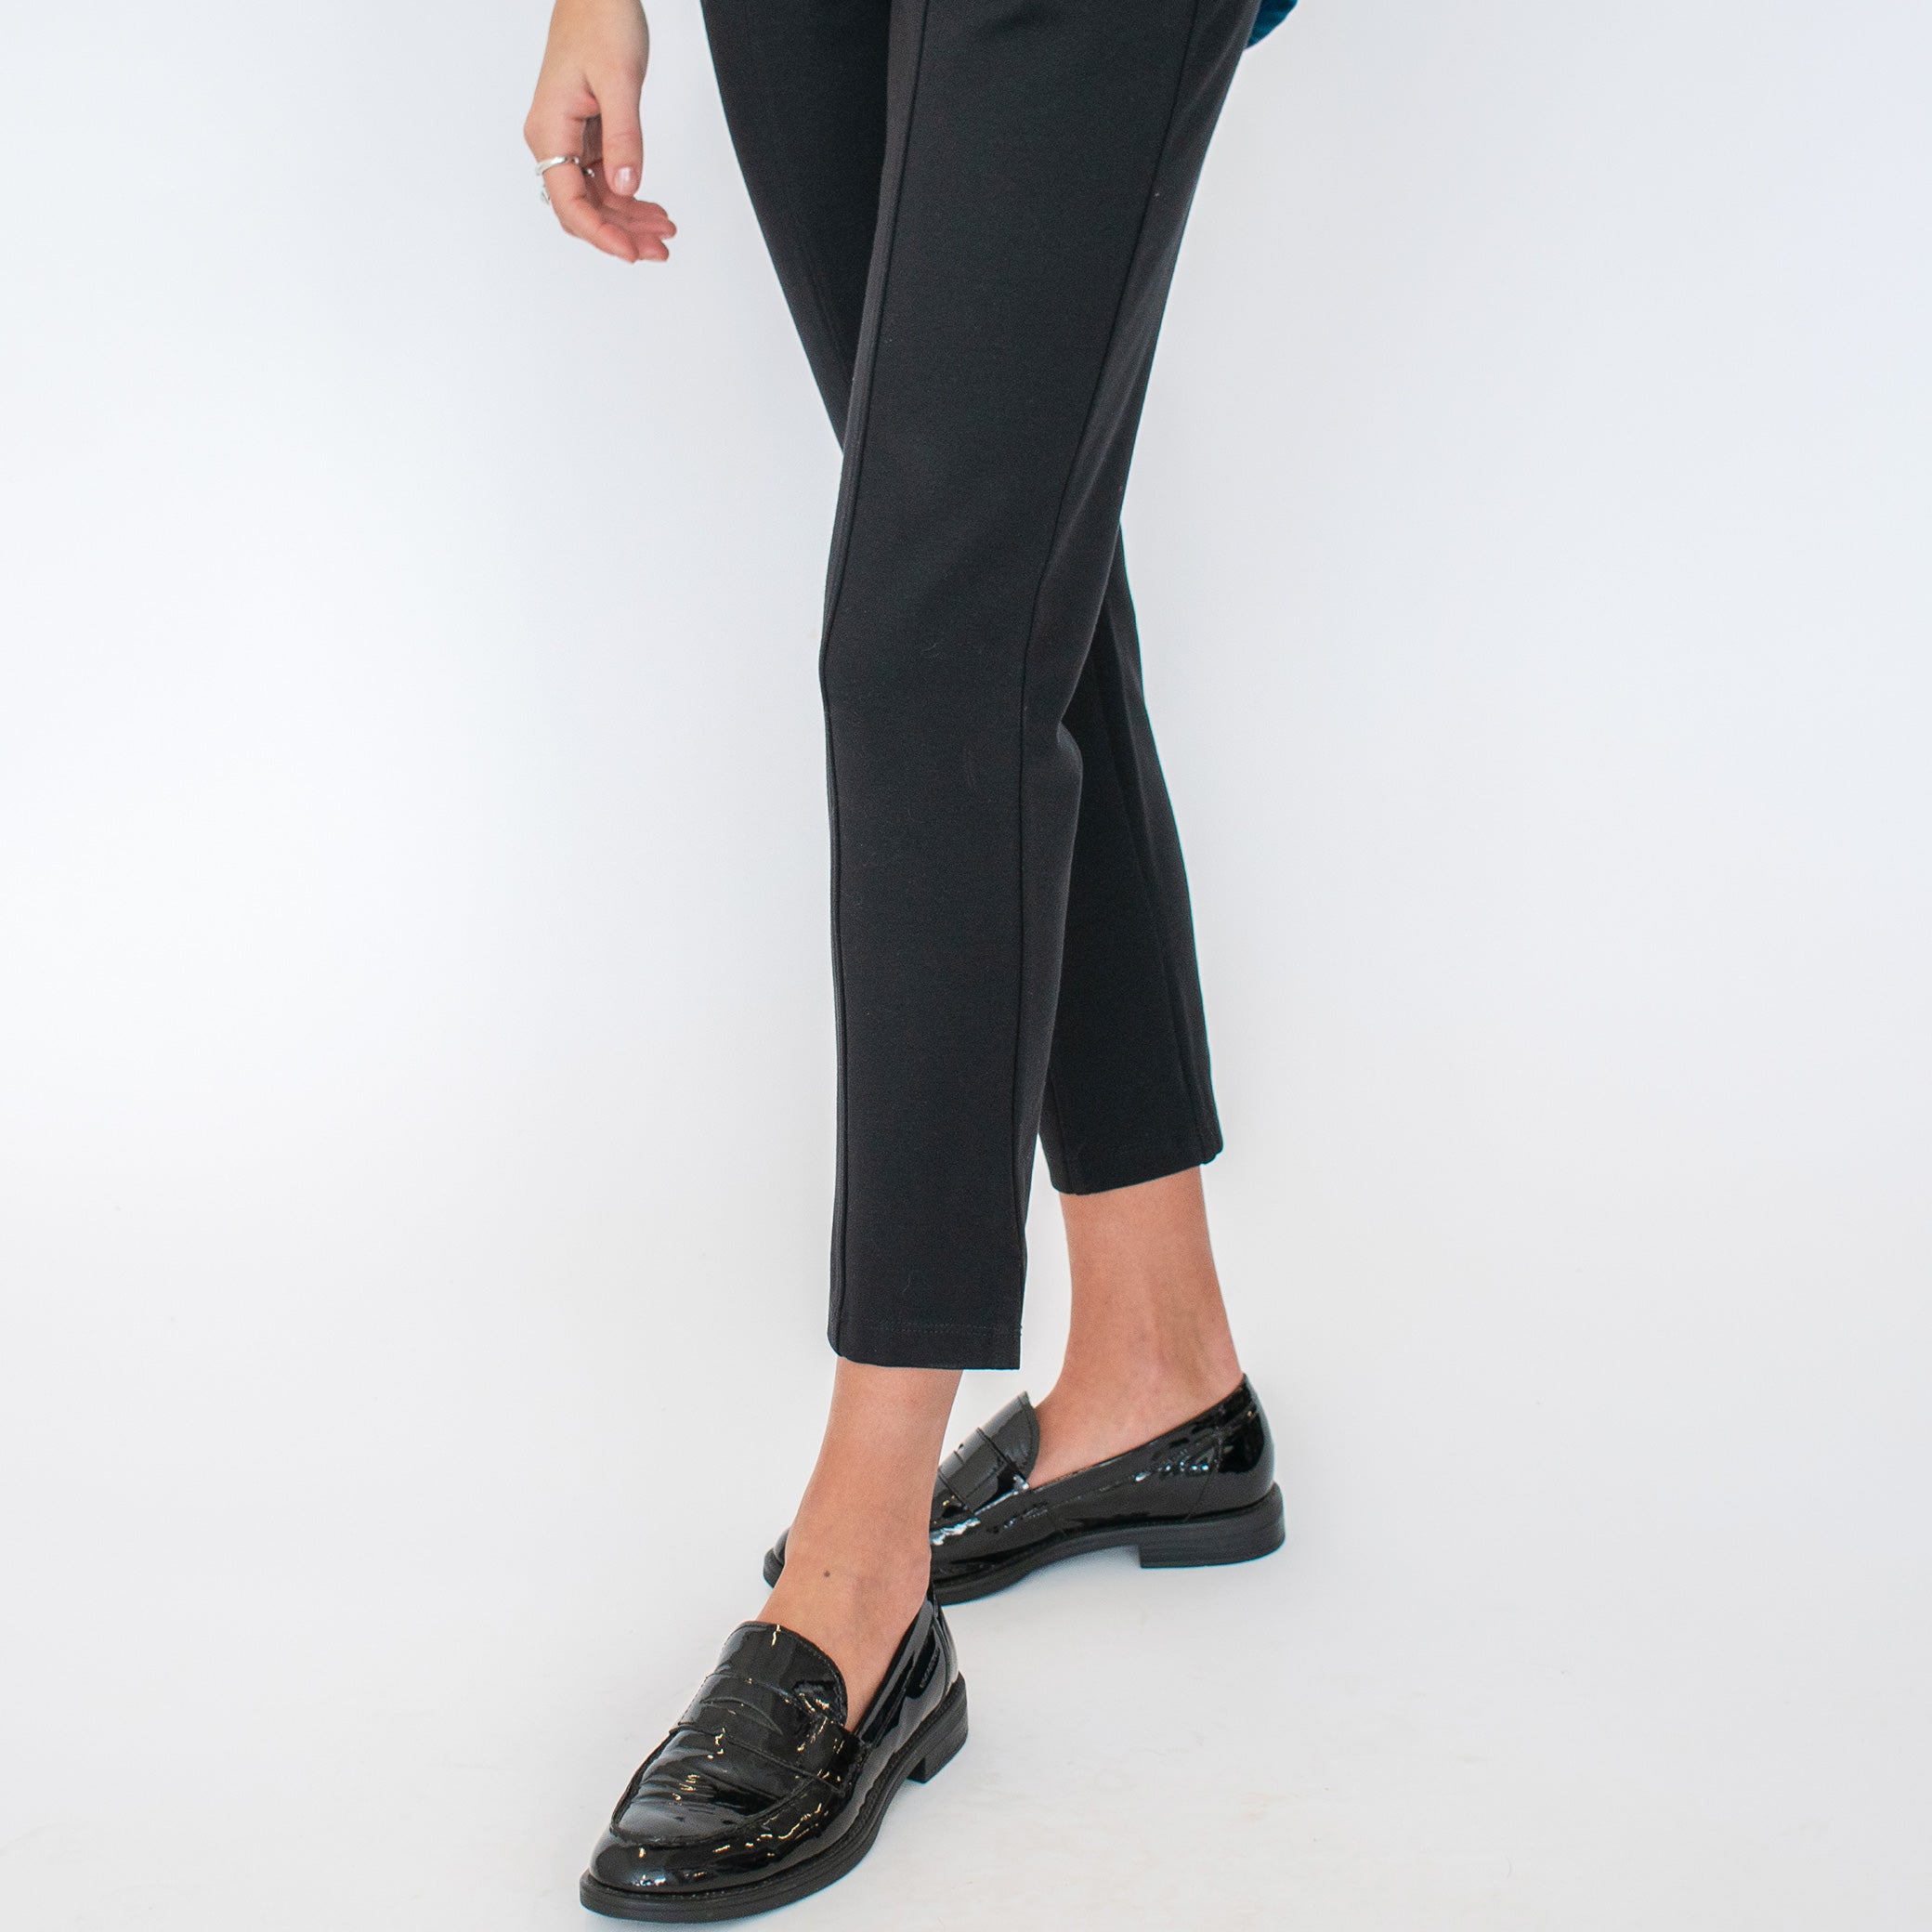 Woman wearing black tailored stretchy ankle length pants